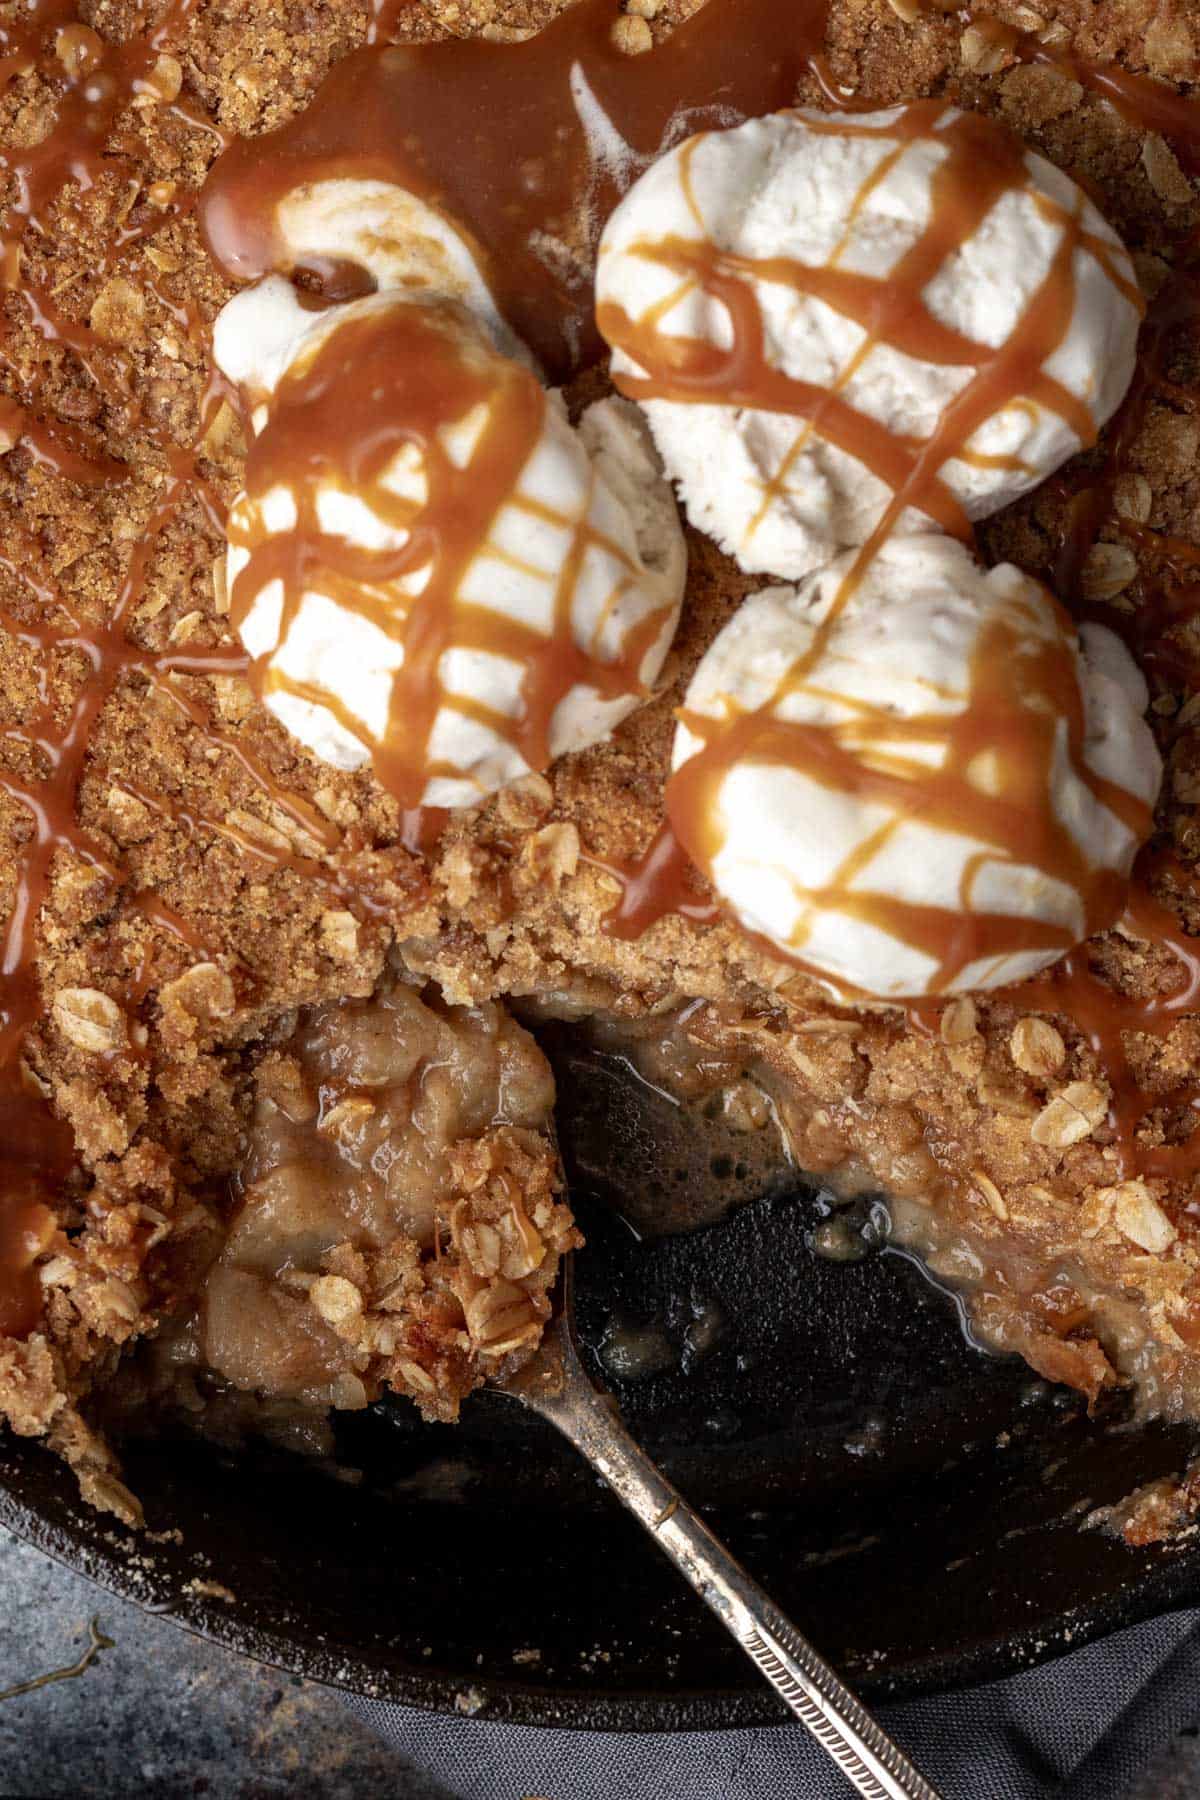 A large serving spoon scooping apple crisp topped with vanilla ice cream and caramel sauce from a skillet.